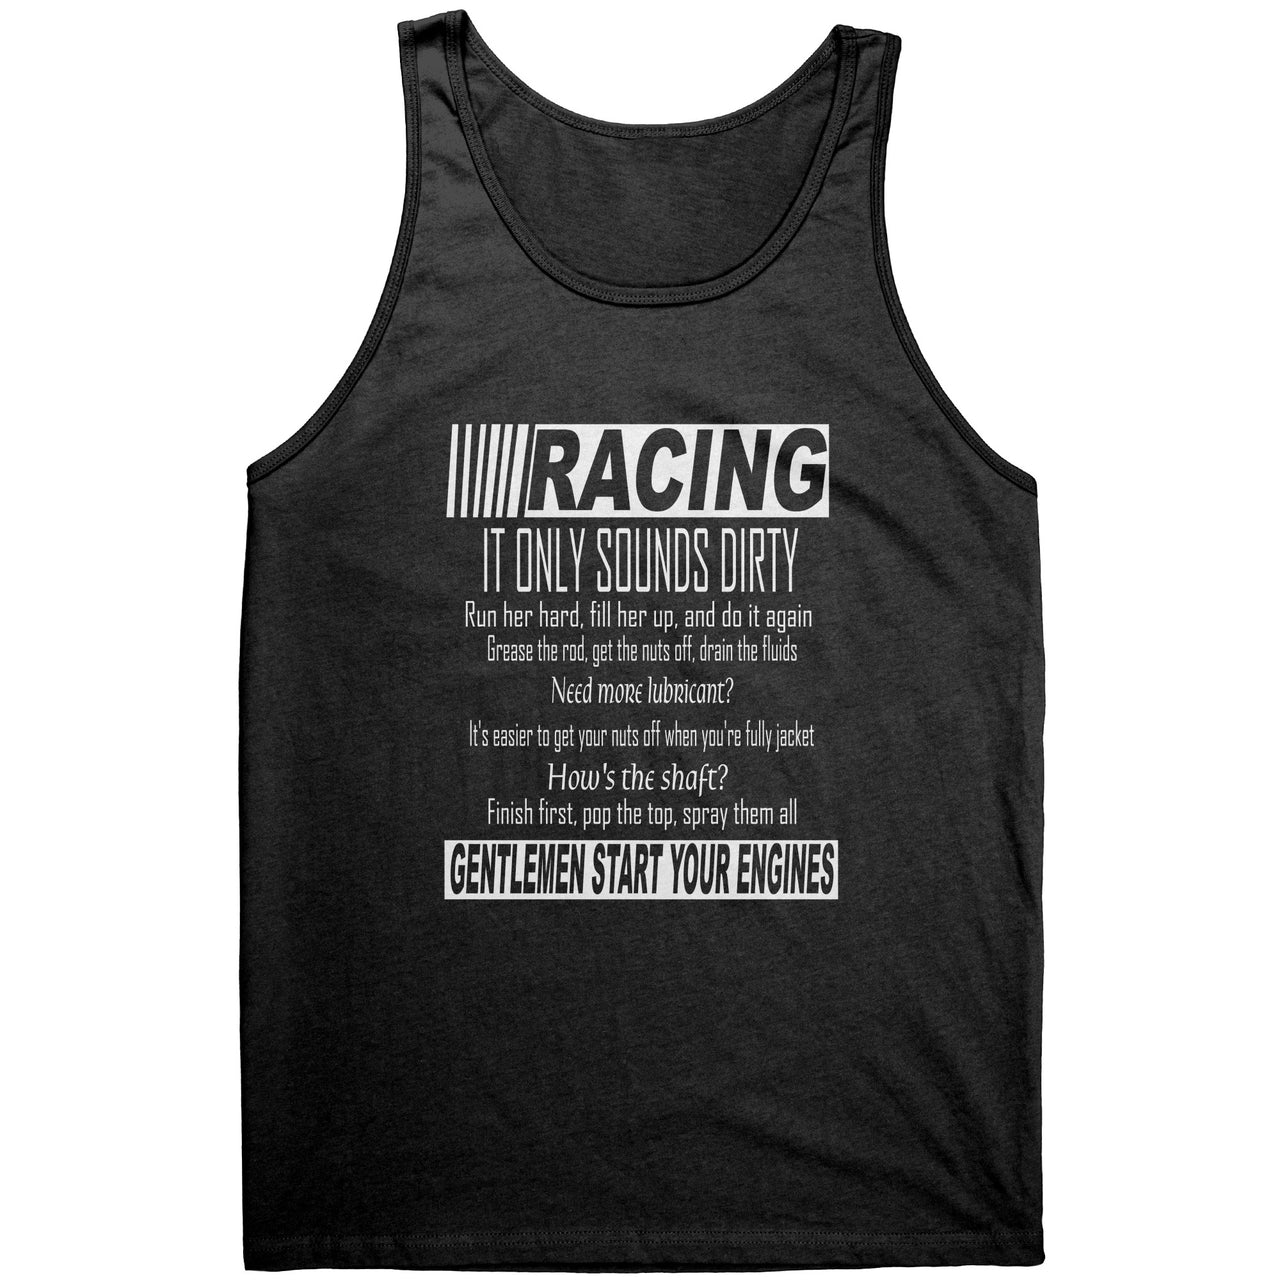 Racing It only sounds dirty Tanks/Hoodies WV